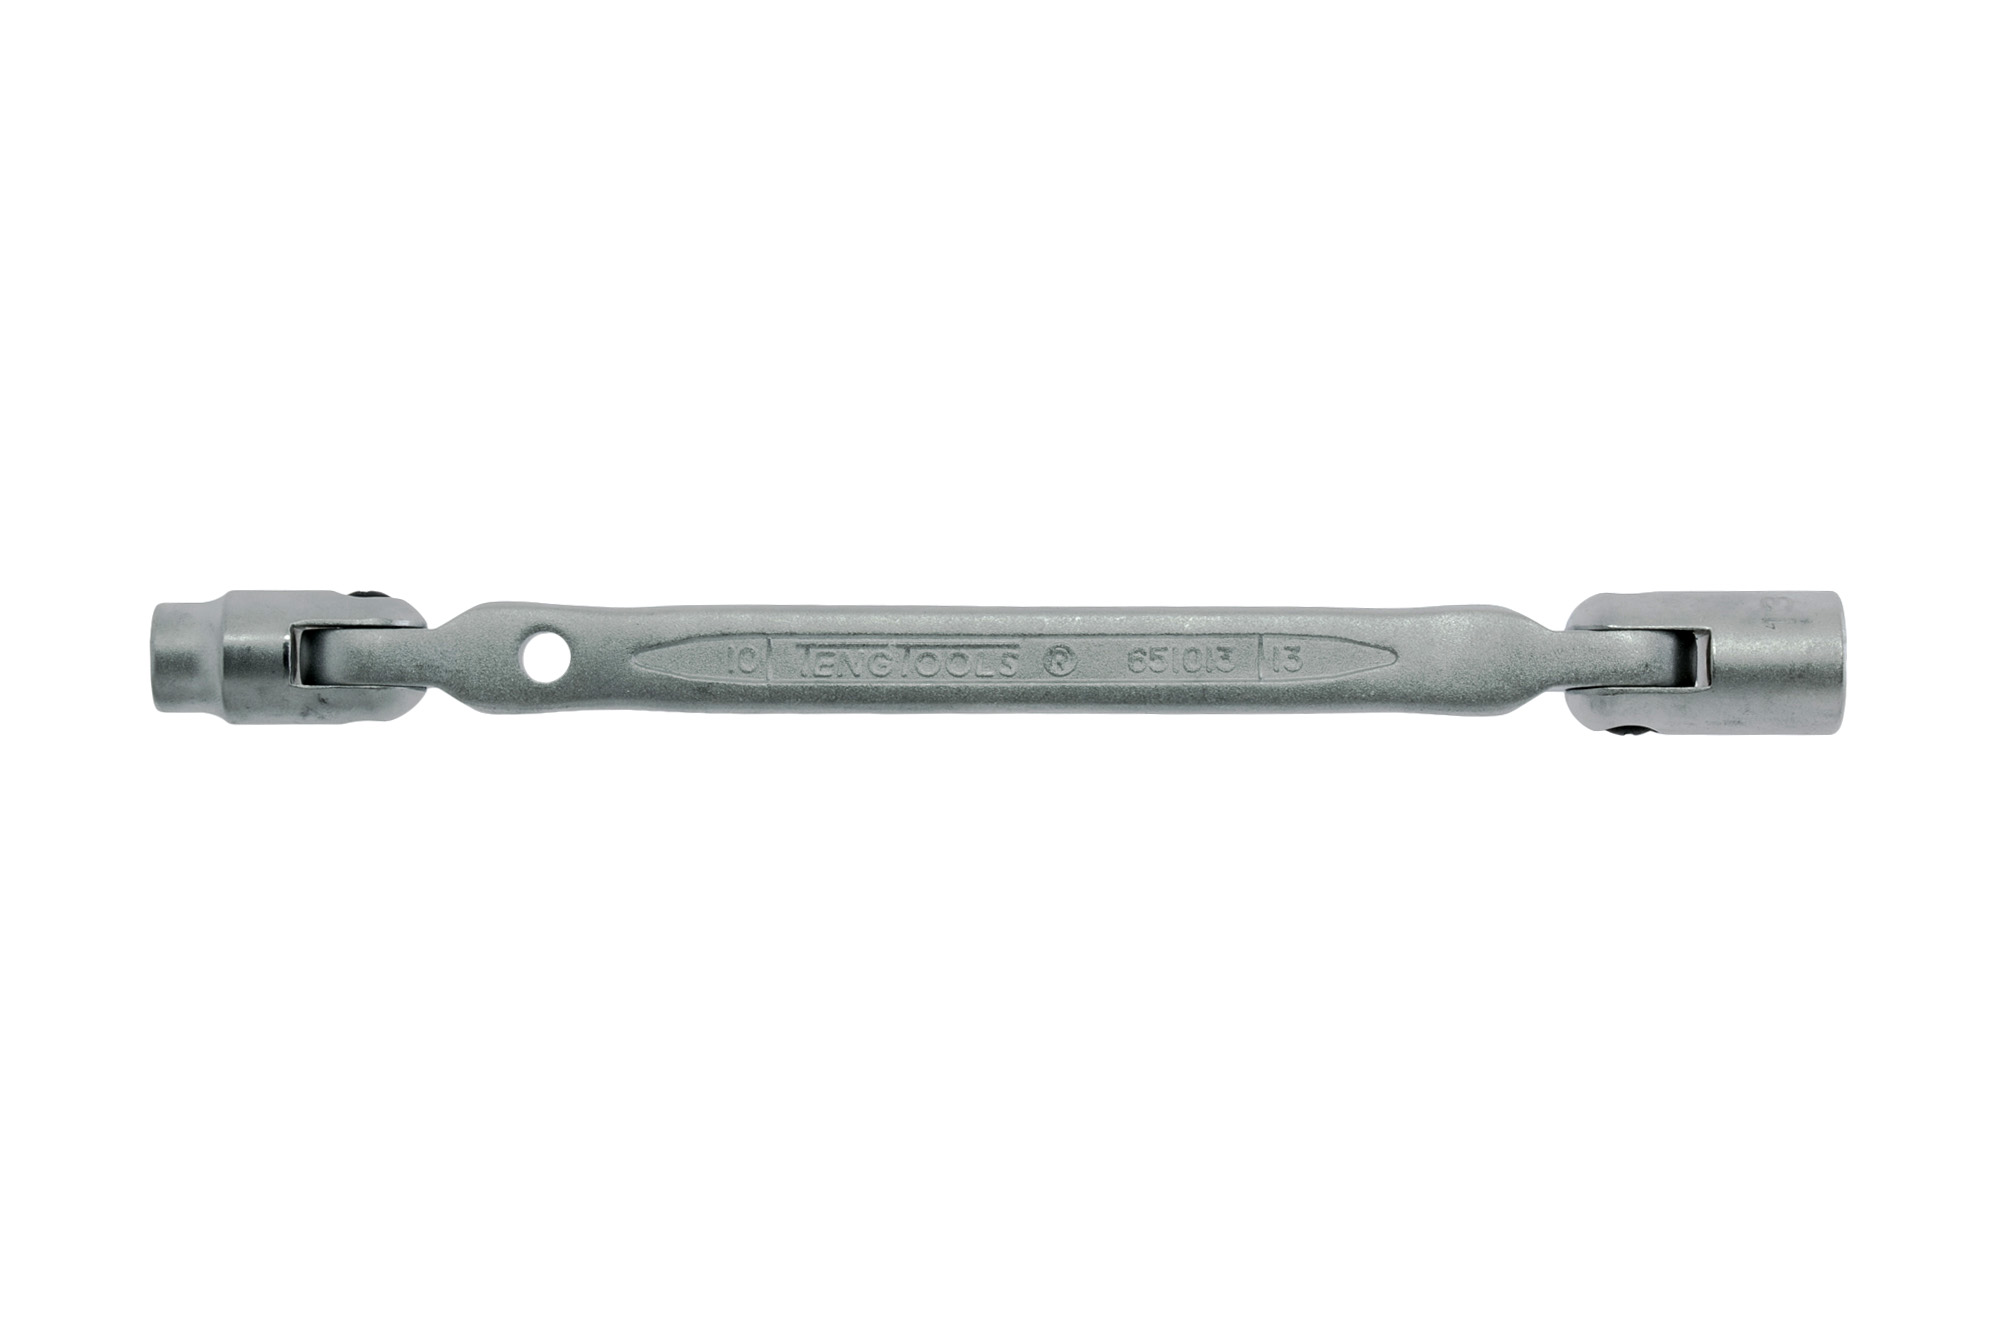 Teng Tools 10 x 13mm 12 Point Double Flex Wrench - 651013